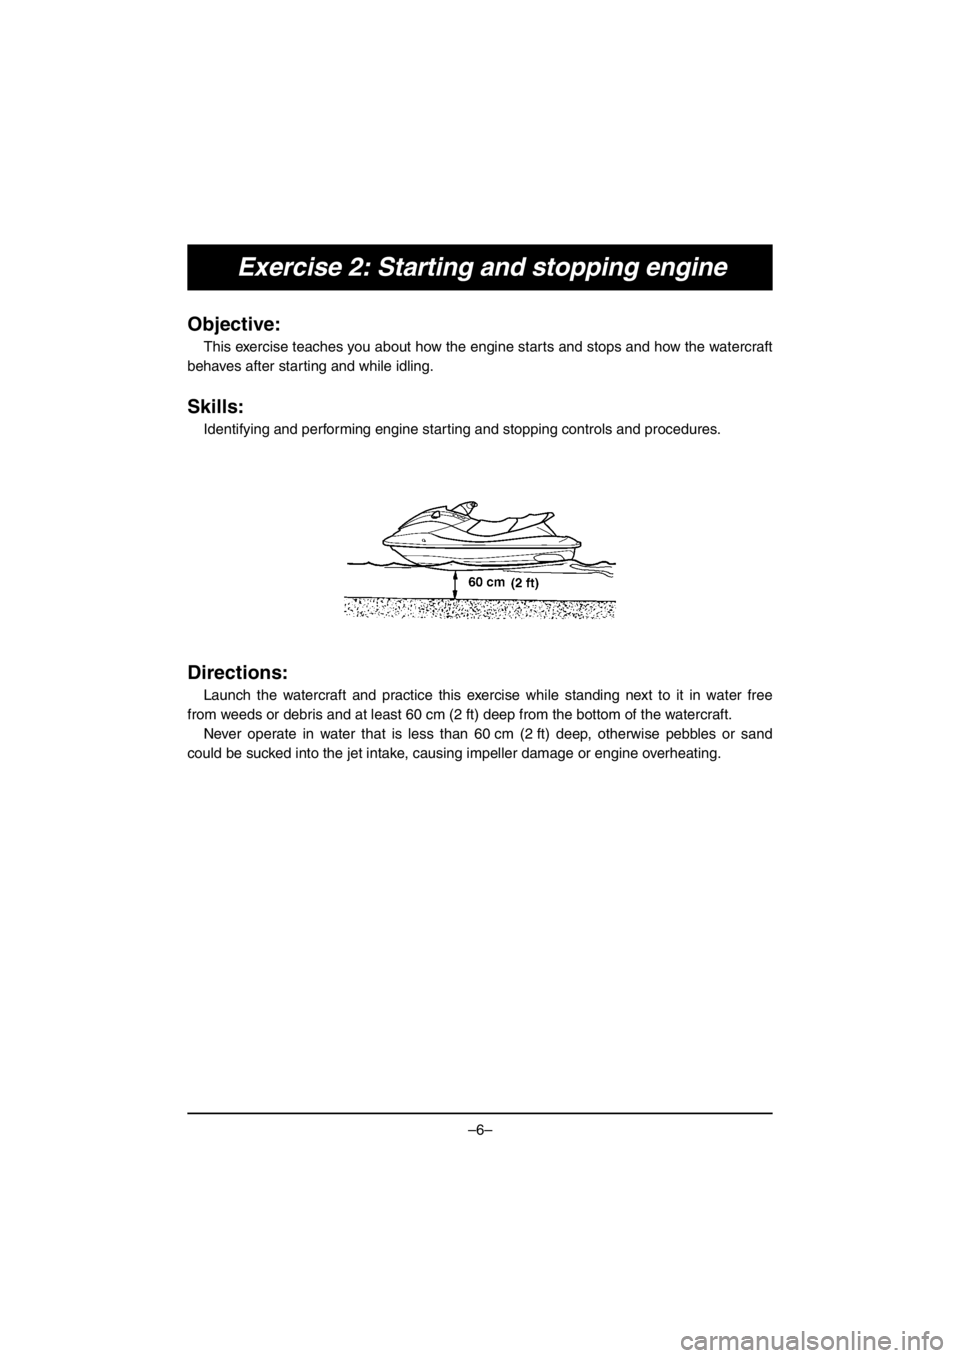 YAMAHA VX DELUXE 2016  Notices Demploi (in French) –6–
Exercise 2: Starting and stopping engine
Objective:
This exercise teaches you about how the engine starts and stops and how the watercraft
behaves after starting and while idling.
Skills:
Iden